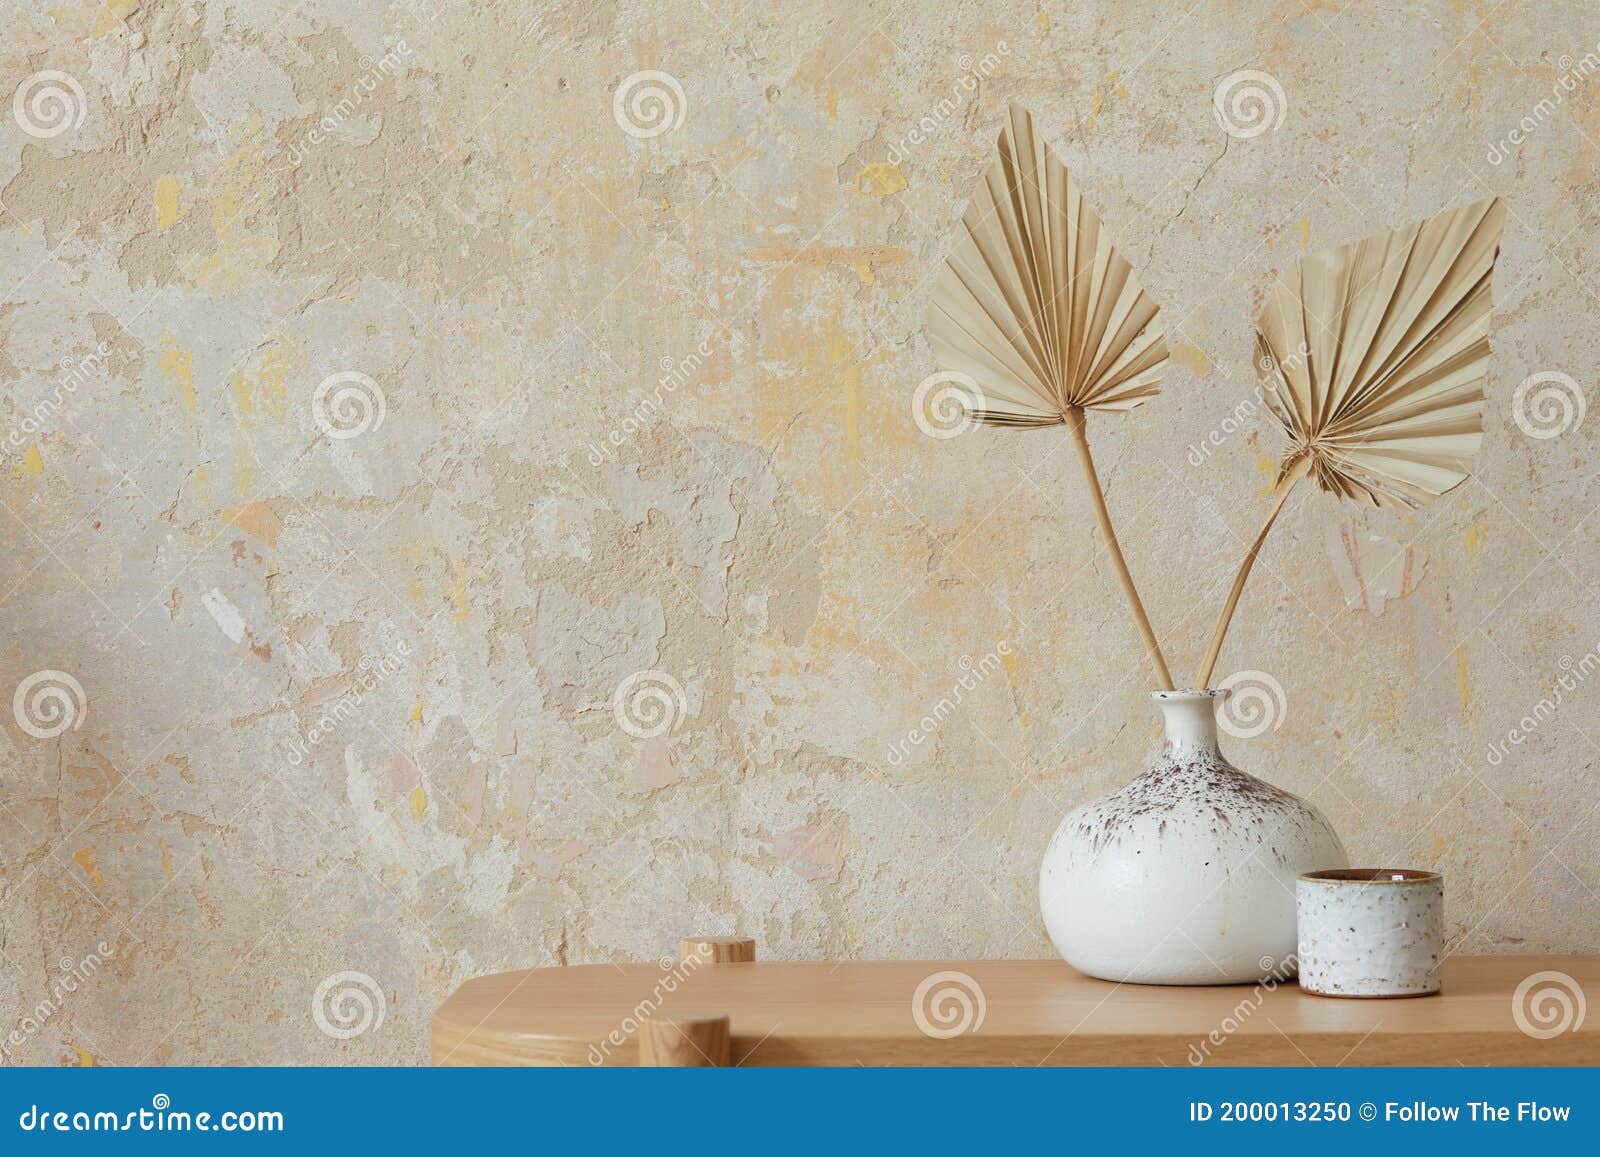 wabi sabi interior of living room with wooden console, paper flowers in vase, accessories and copy space. minimalistic concept.